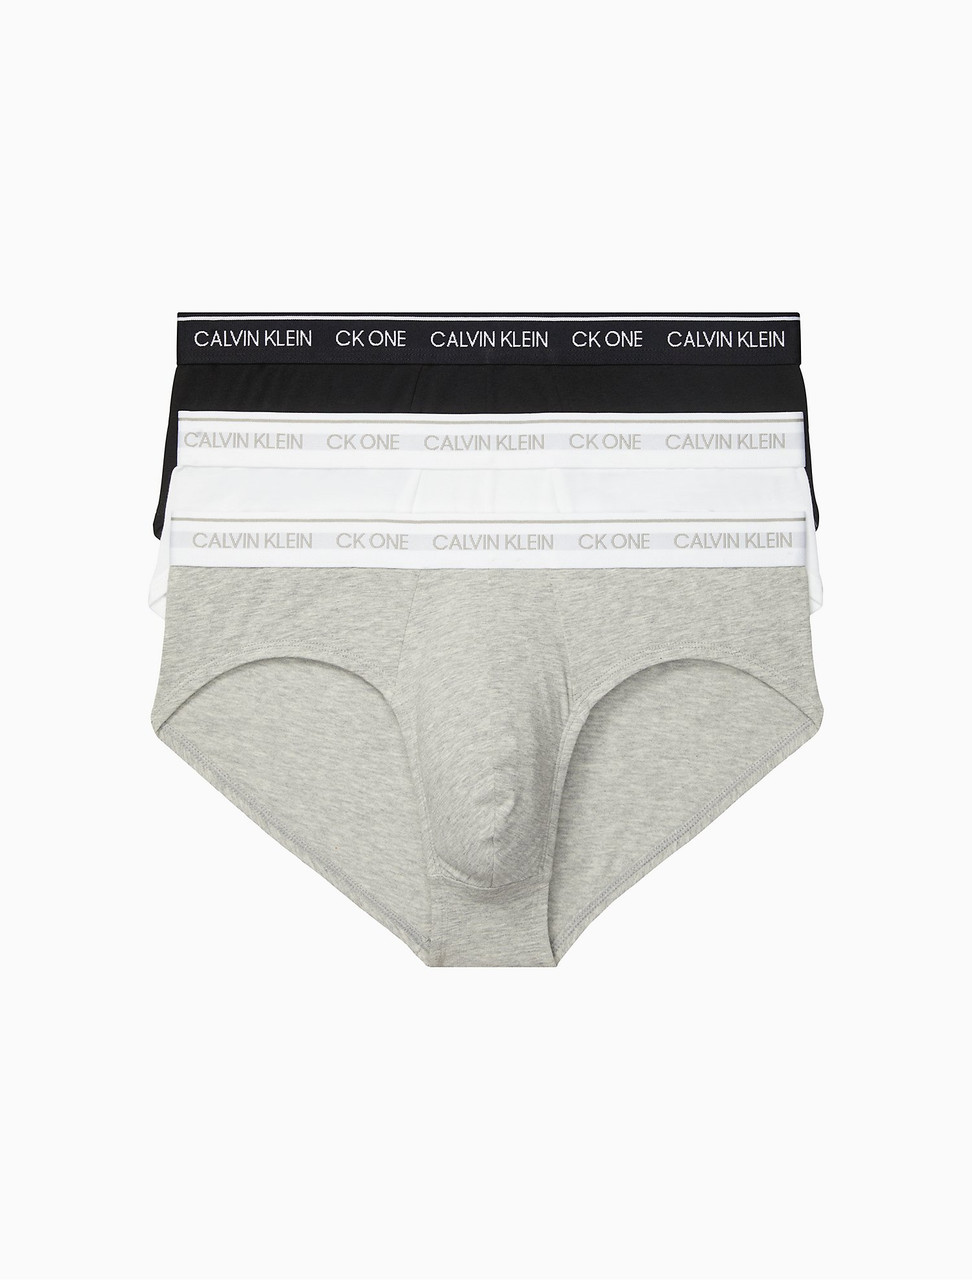 Calvin Klein CK One Cotton Stretch Hip Brief 3-Pack Black/White/  NB2405-900/MP1 - Free Shipping at LASC